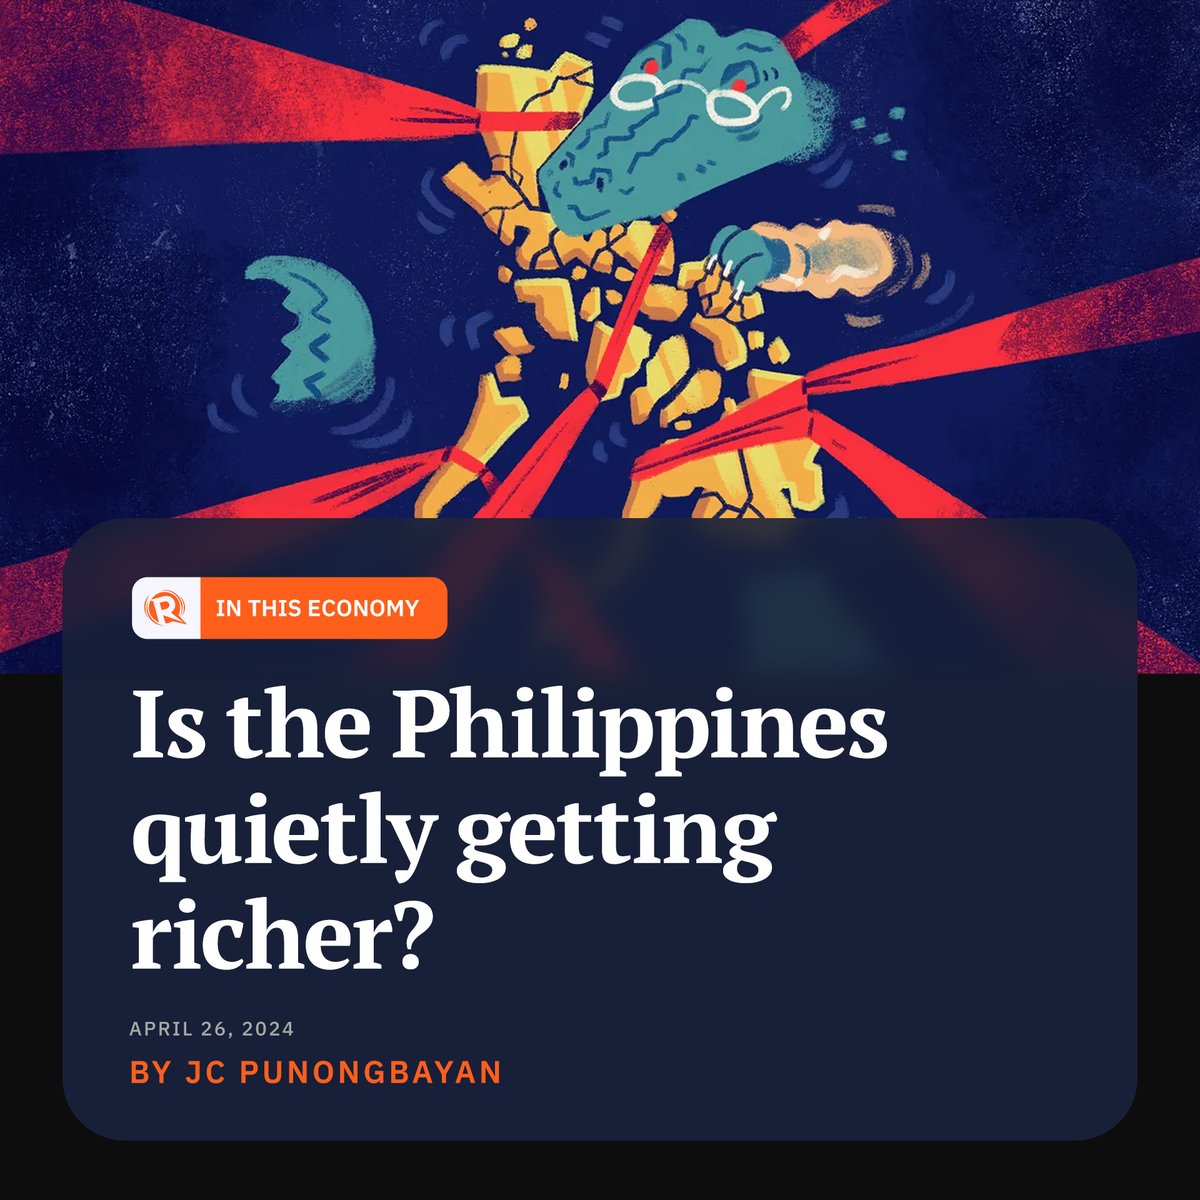 'We could be a lot more prosperous now if not for the myriad domestic constraints that keep pulling us back,' writes Rappler columnist JC Punongbayan in this #Opinion #ThoughtLeaders piece: trib.al/oztoyXr